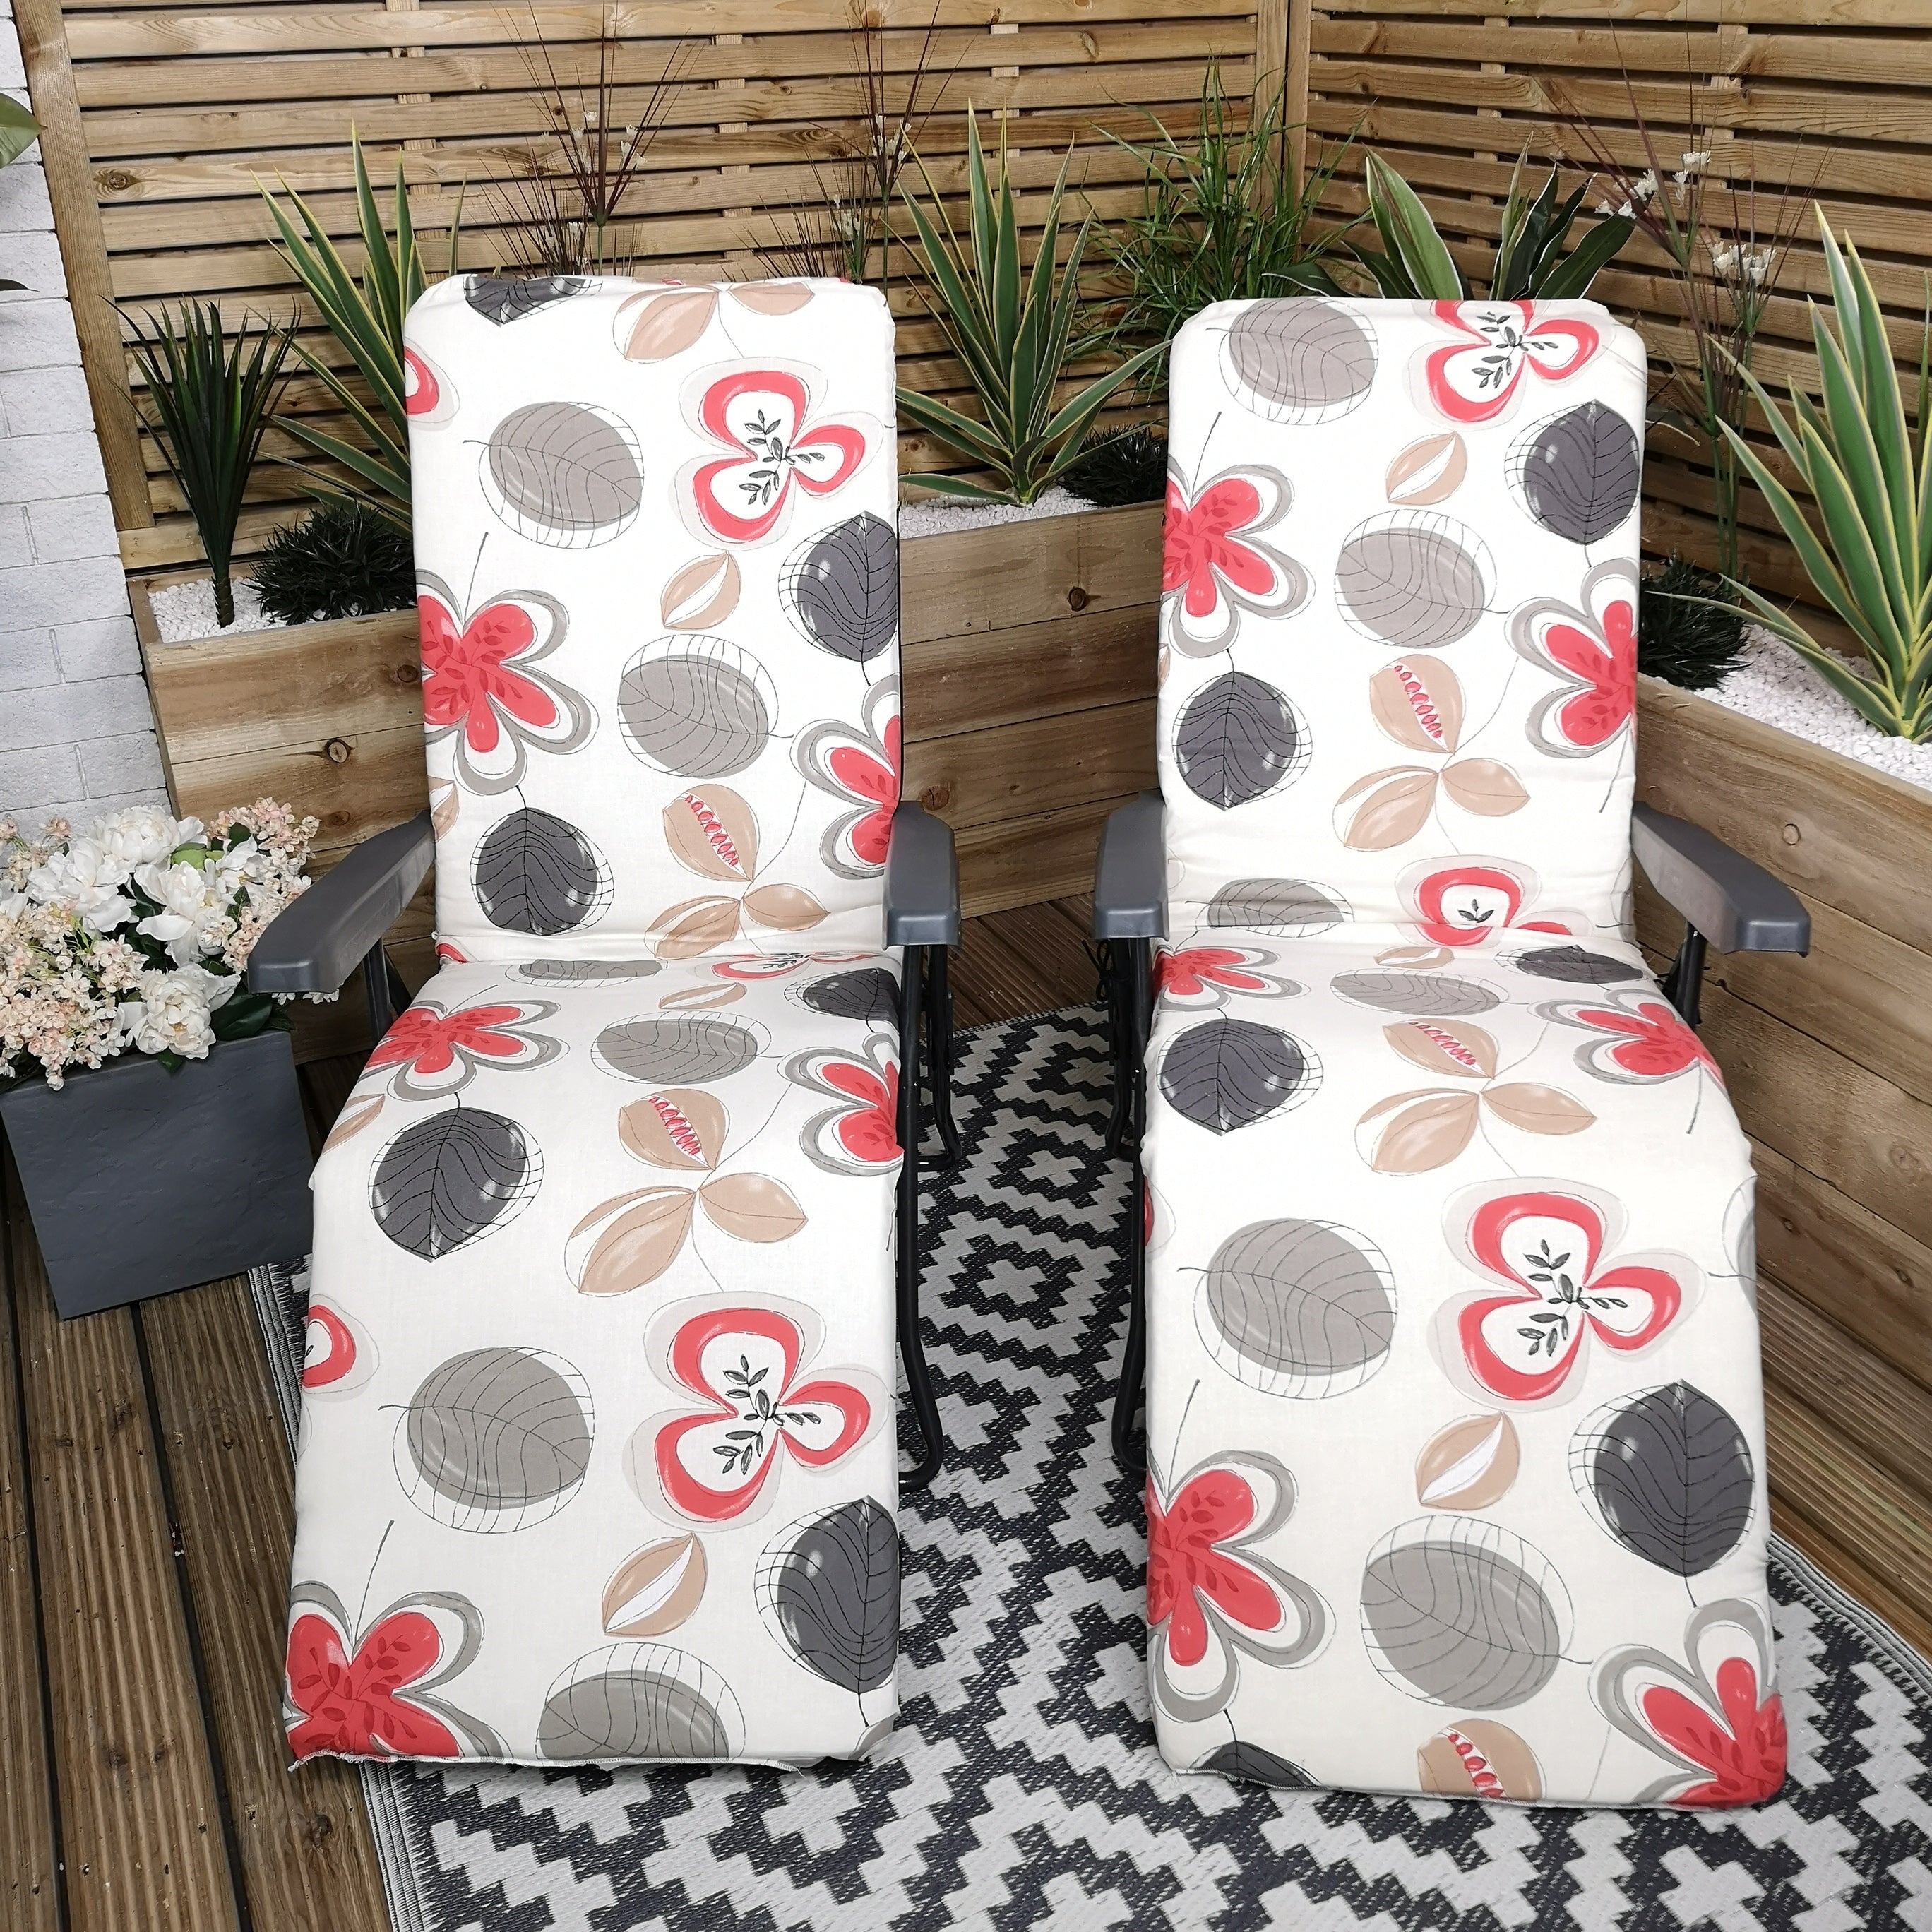 Set of 2 Padded Outdoor Garden Patio Recliner / Sun Lounger with Flowers